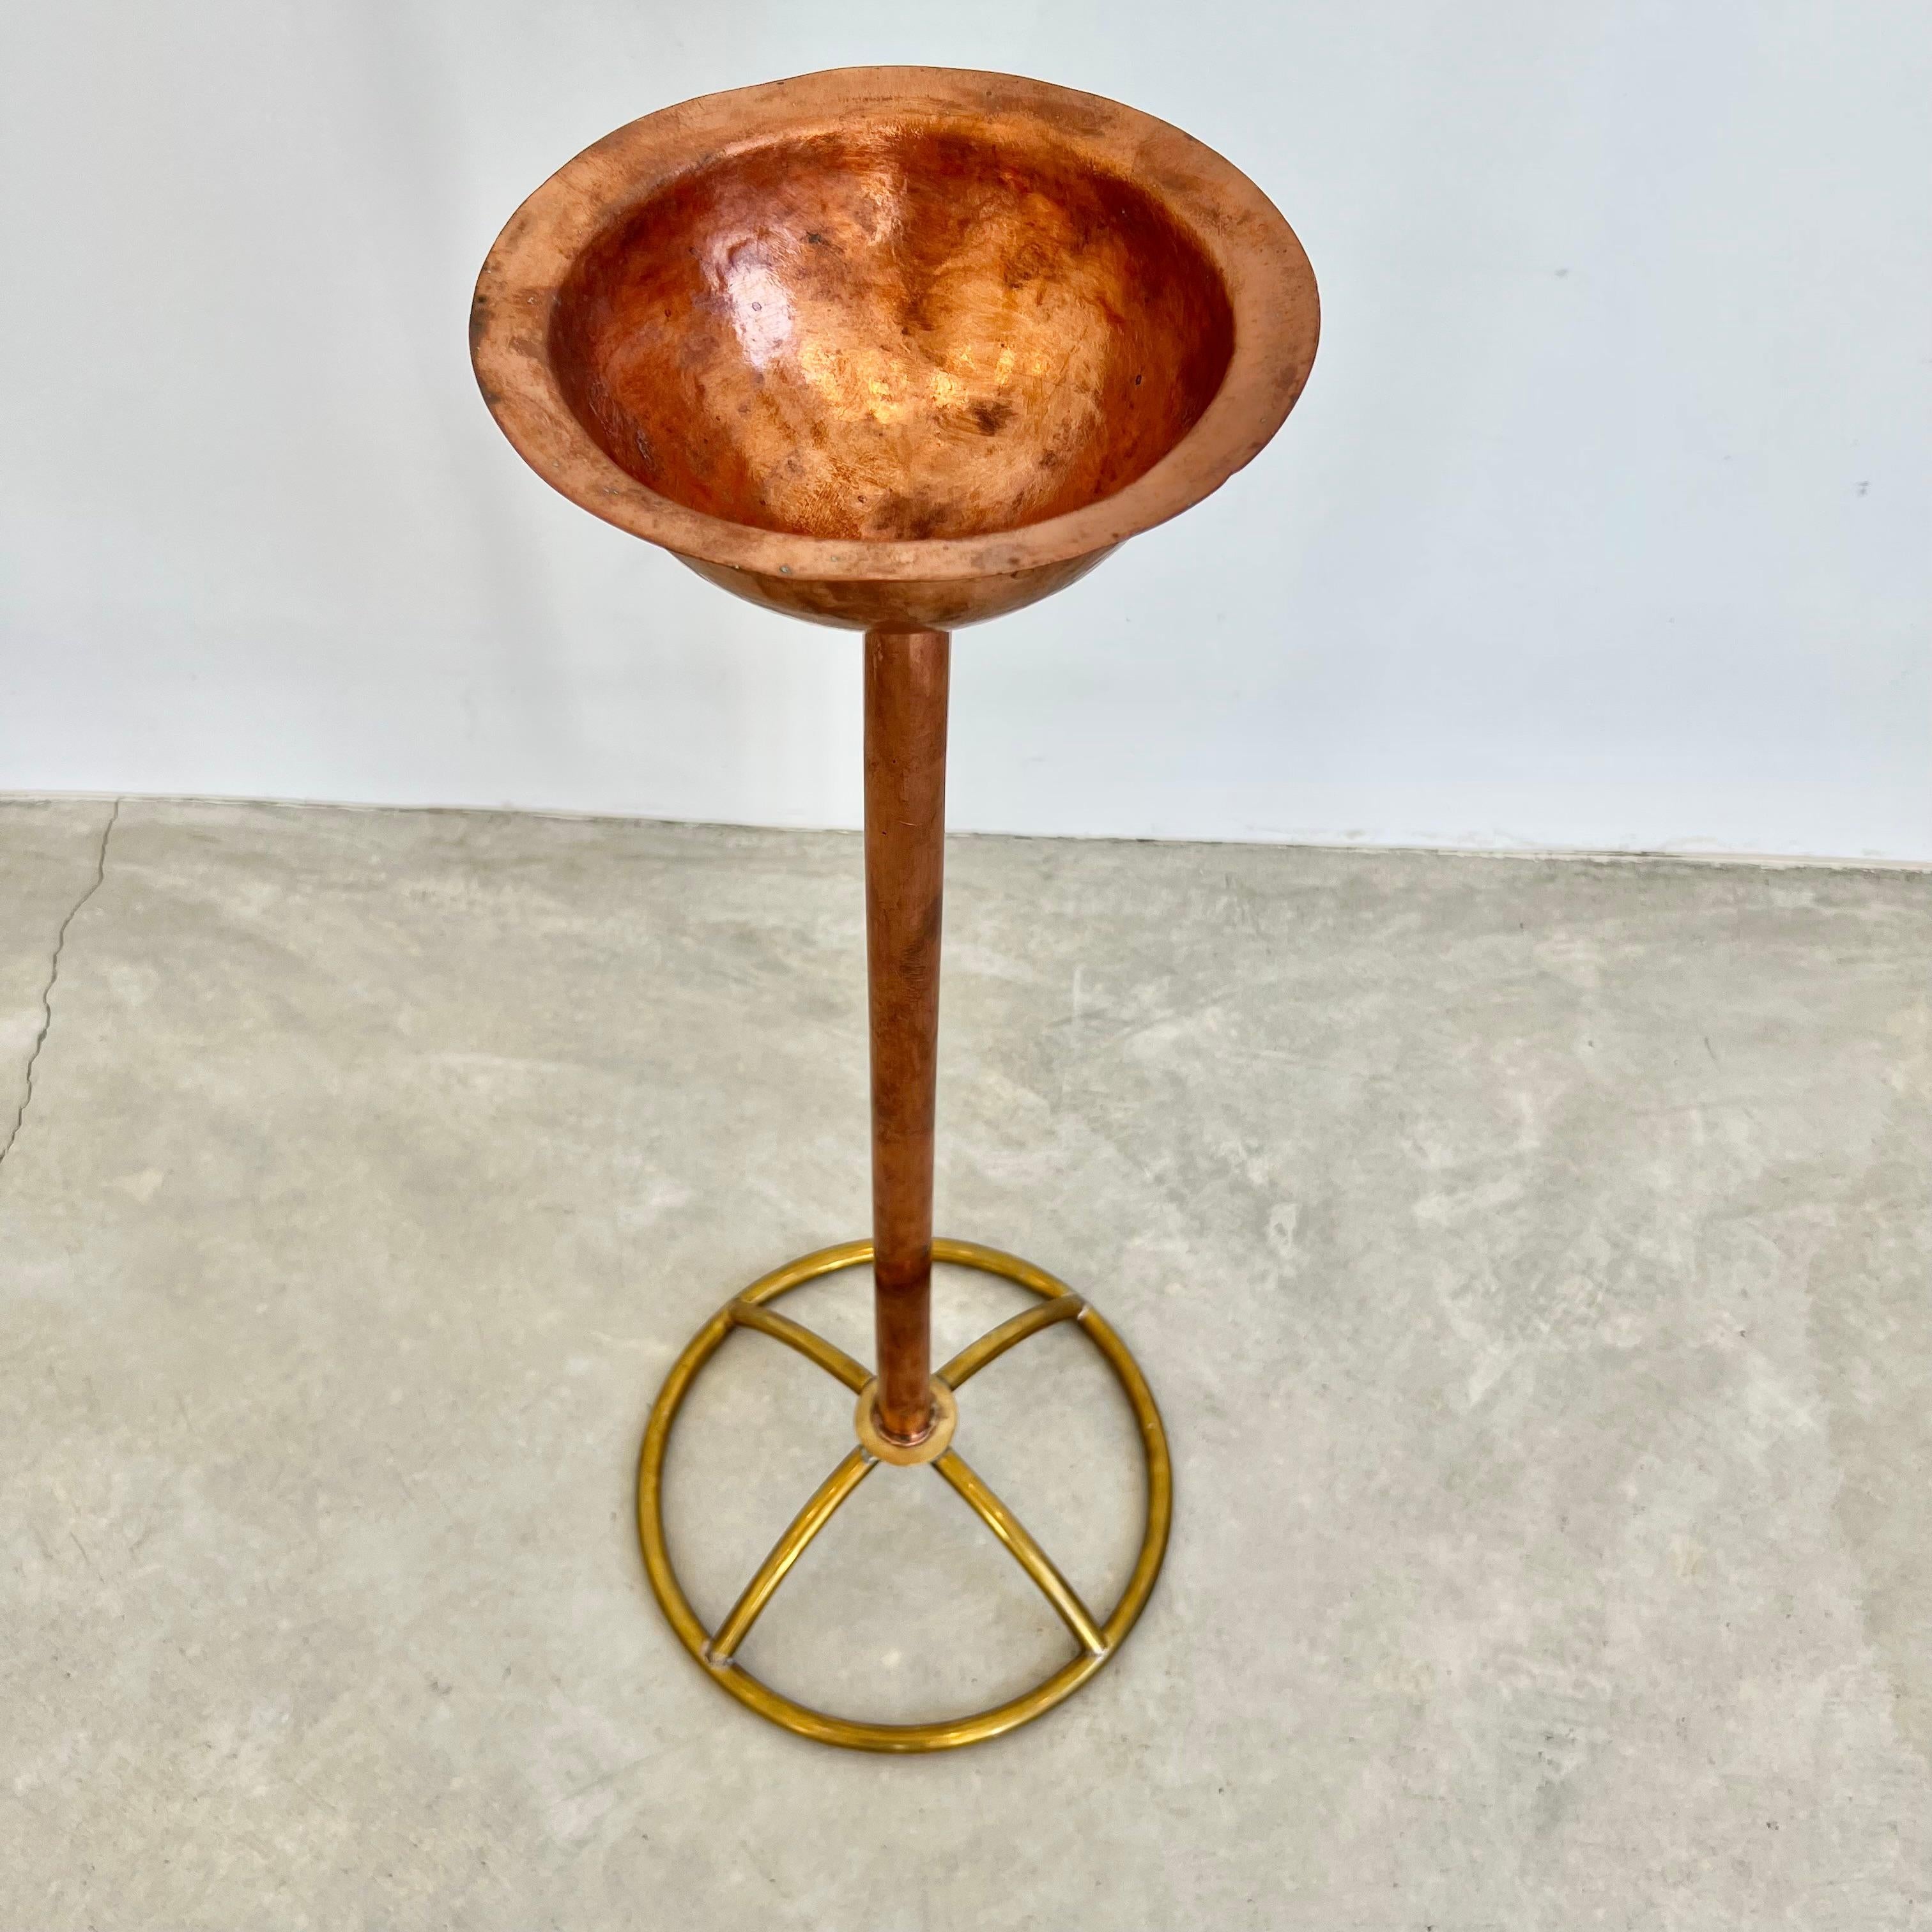 Sculptural standing catchall made of brass and copper. Large solid copper bowl with a thin rim floats atop a substantial copper rod. The copper body of the catchall is affixed to a beautiful round brass wheel base. Amazing brushed patina to copper